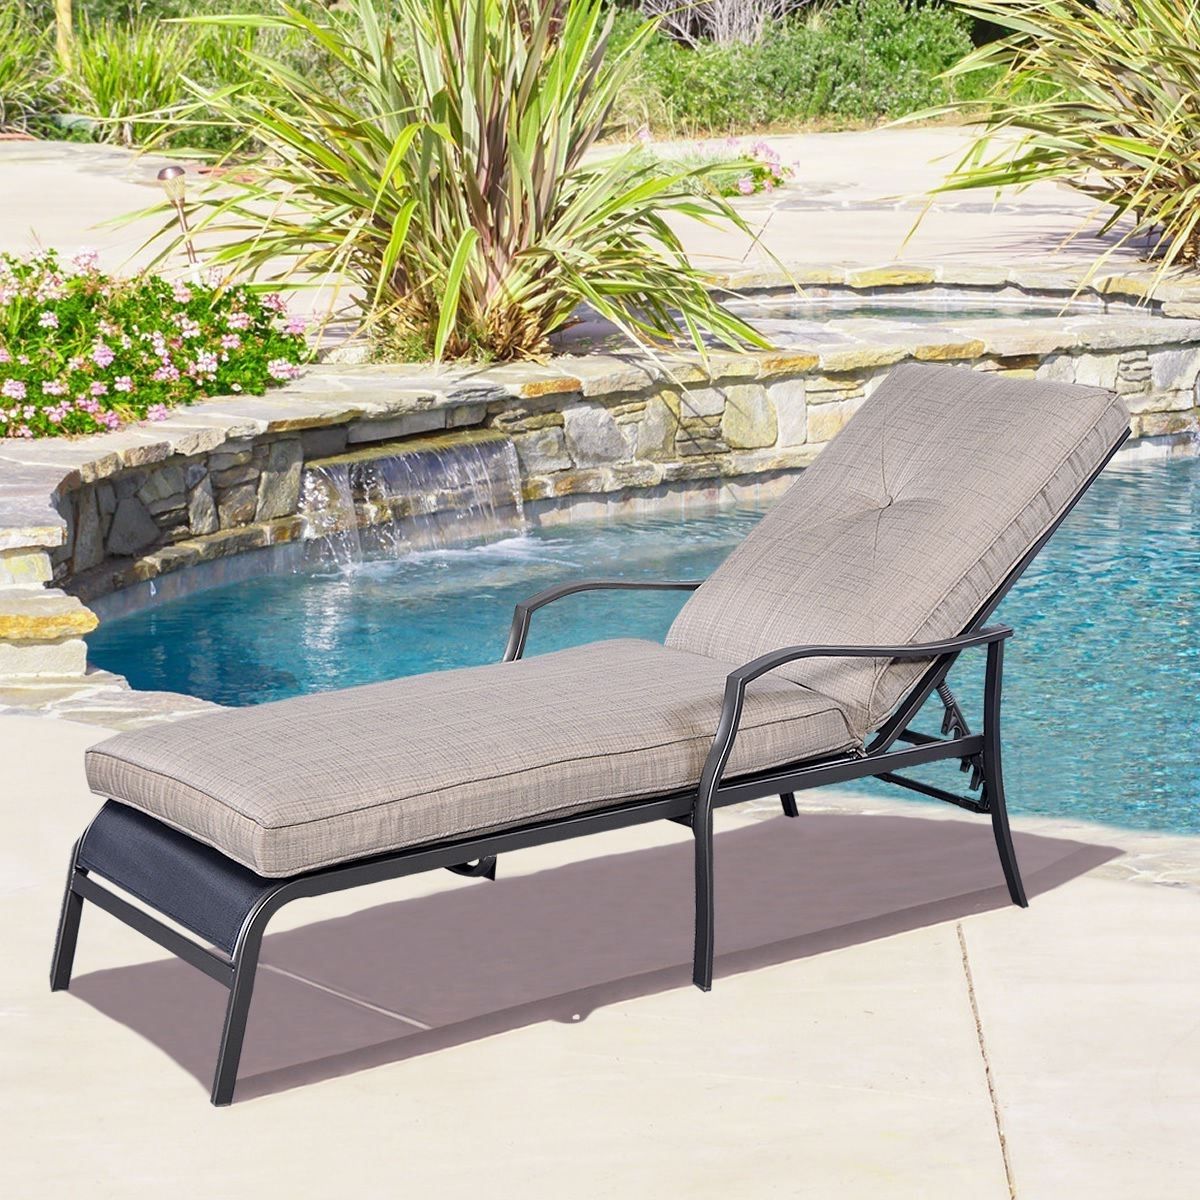 Adjustable Pool Chaise Lounge Chair Recliners Throughout Well Known Selecting Outdoor Lounge Furniture (View 10 of 15)